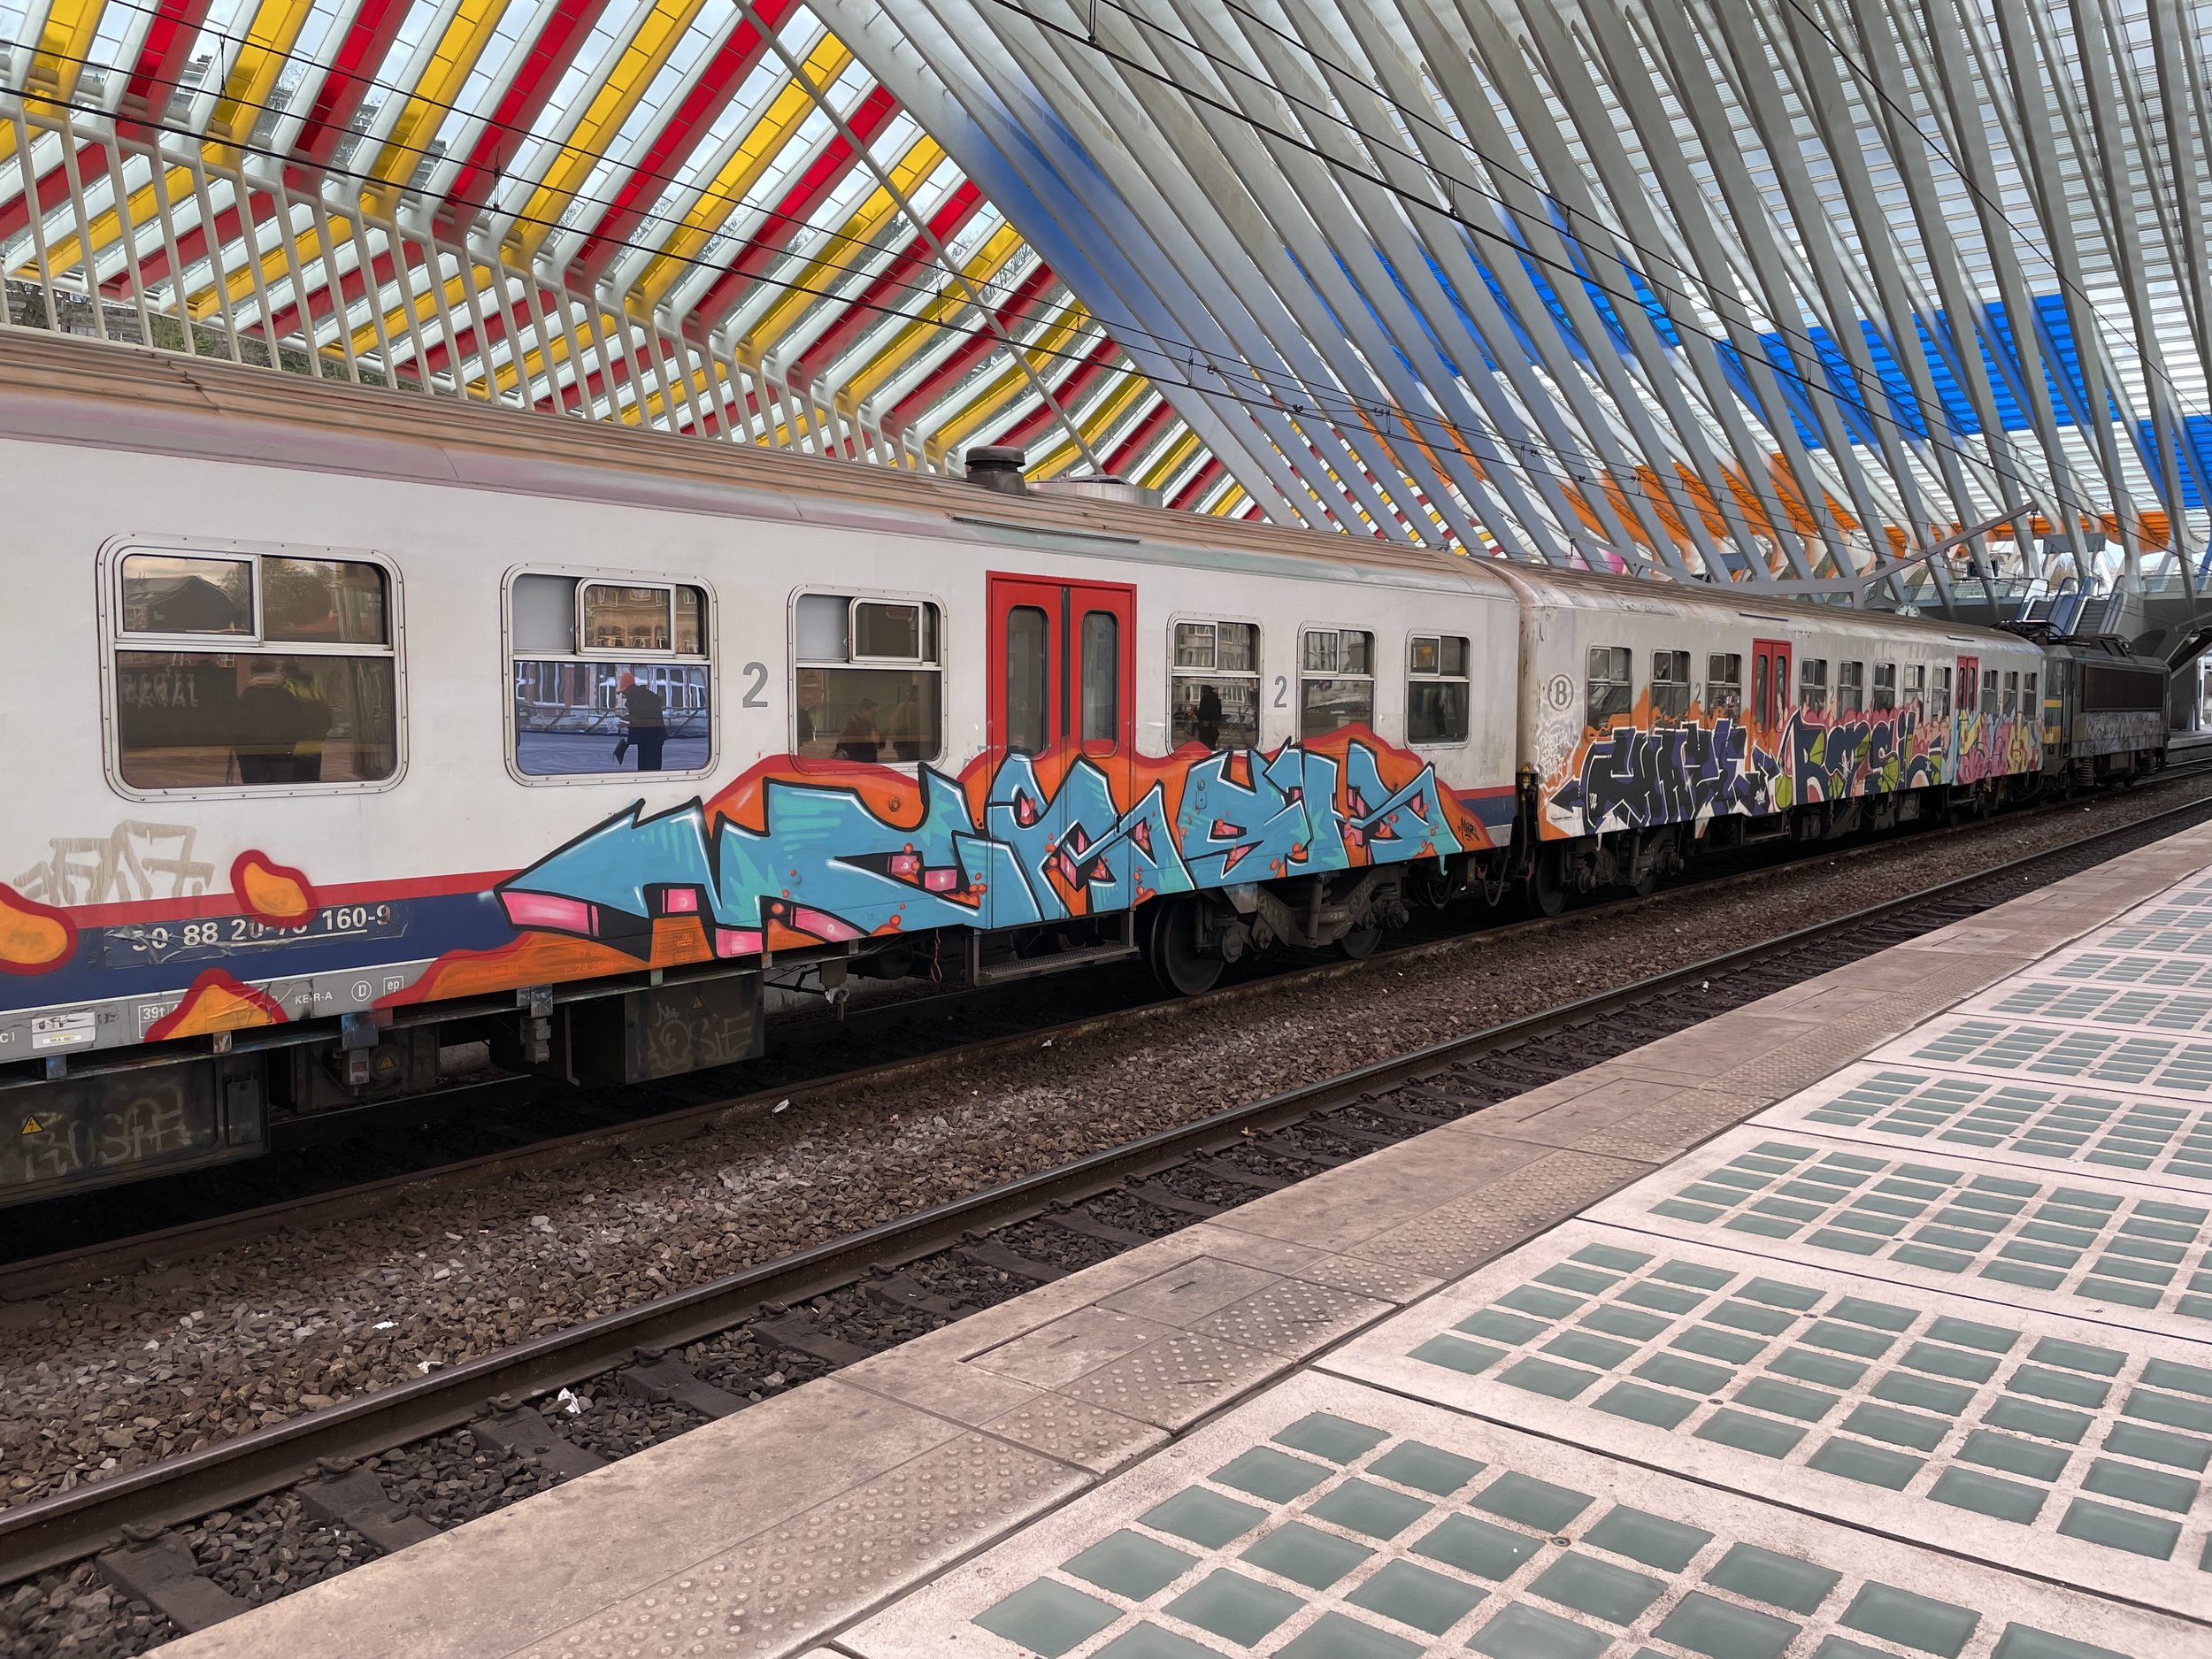 Trains and art!